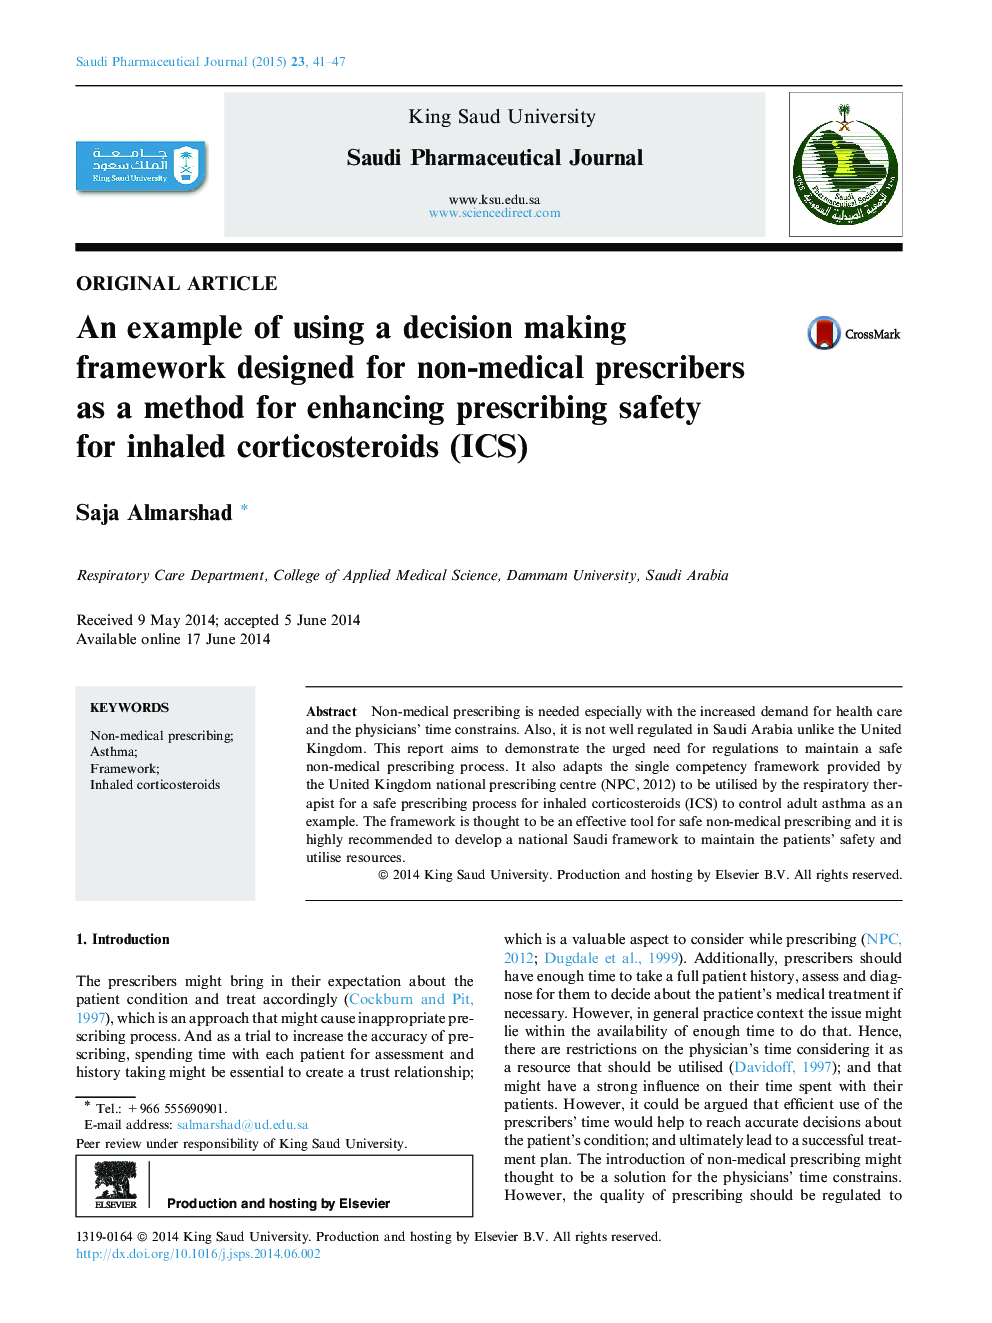 An example of using a decision making framework designed for non-medical prescribers as a method for enhancing prescribing safety for inhaled corticosteroids (ICS) 